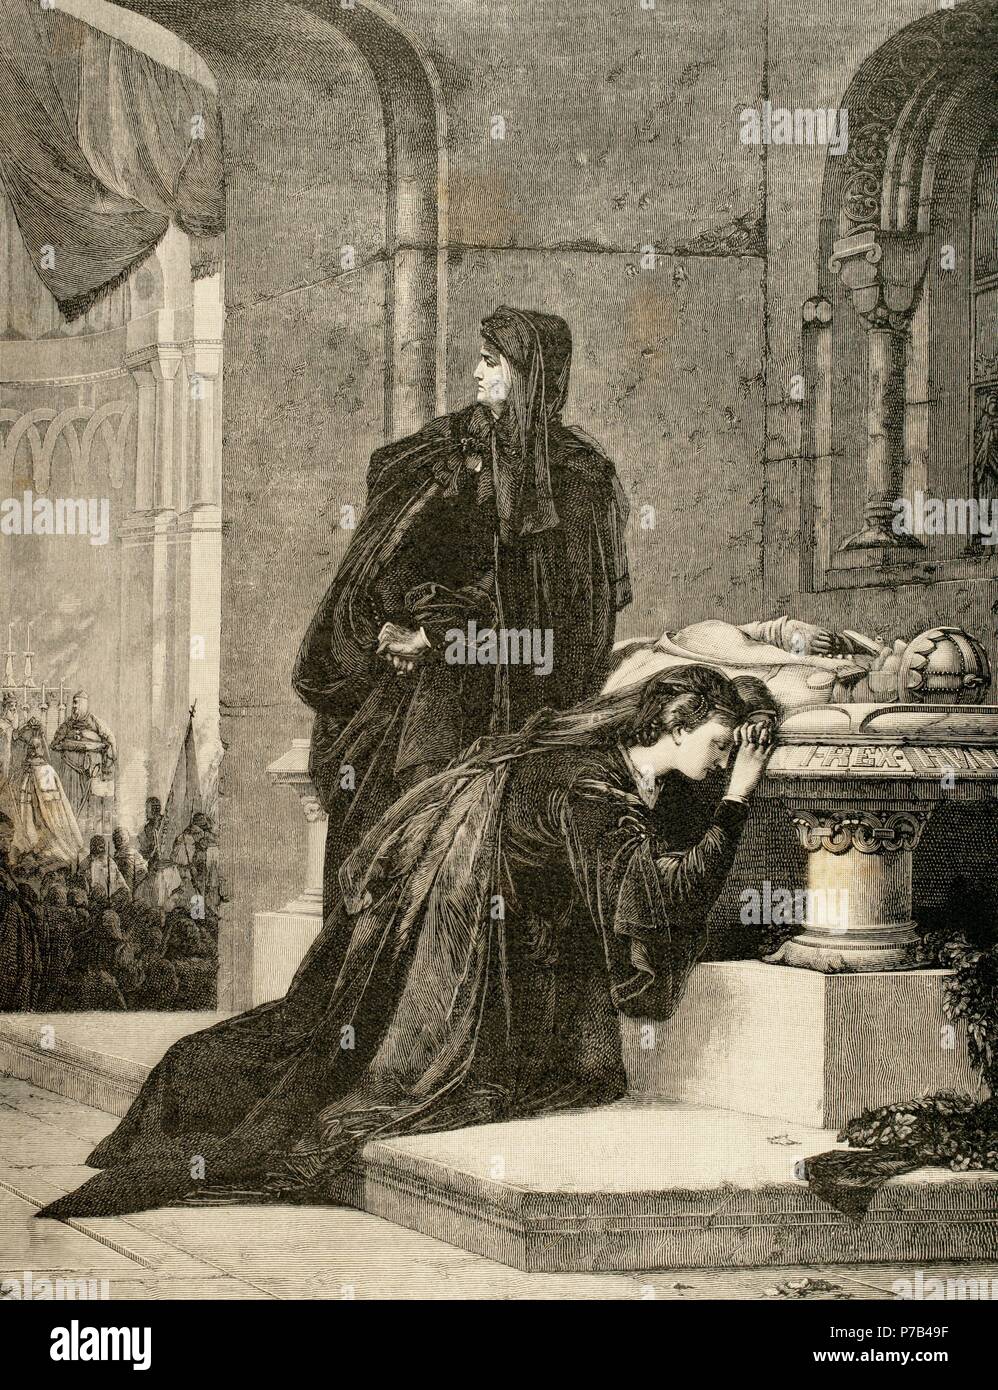 Queen Mary I of Hungary (1371-1395) and his mother Queen consort Elizabeth of Bosnia (1339-1387) mourning at the tomb of her father and husband Louis I of Hungary (1326-1382). Engraving after the painting of A. Liezen-Mayer. 19th century. Stock Photo